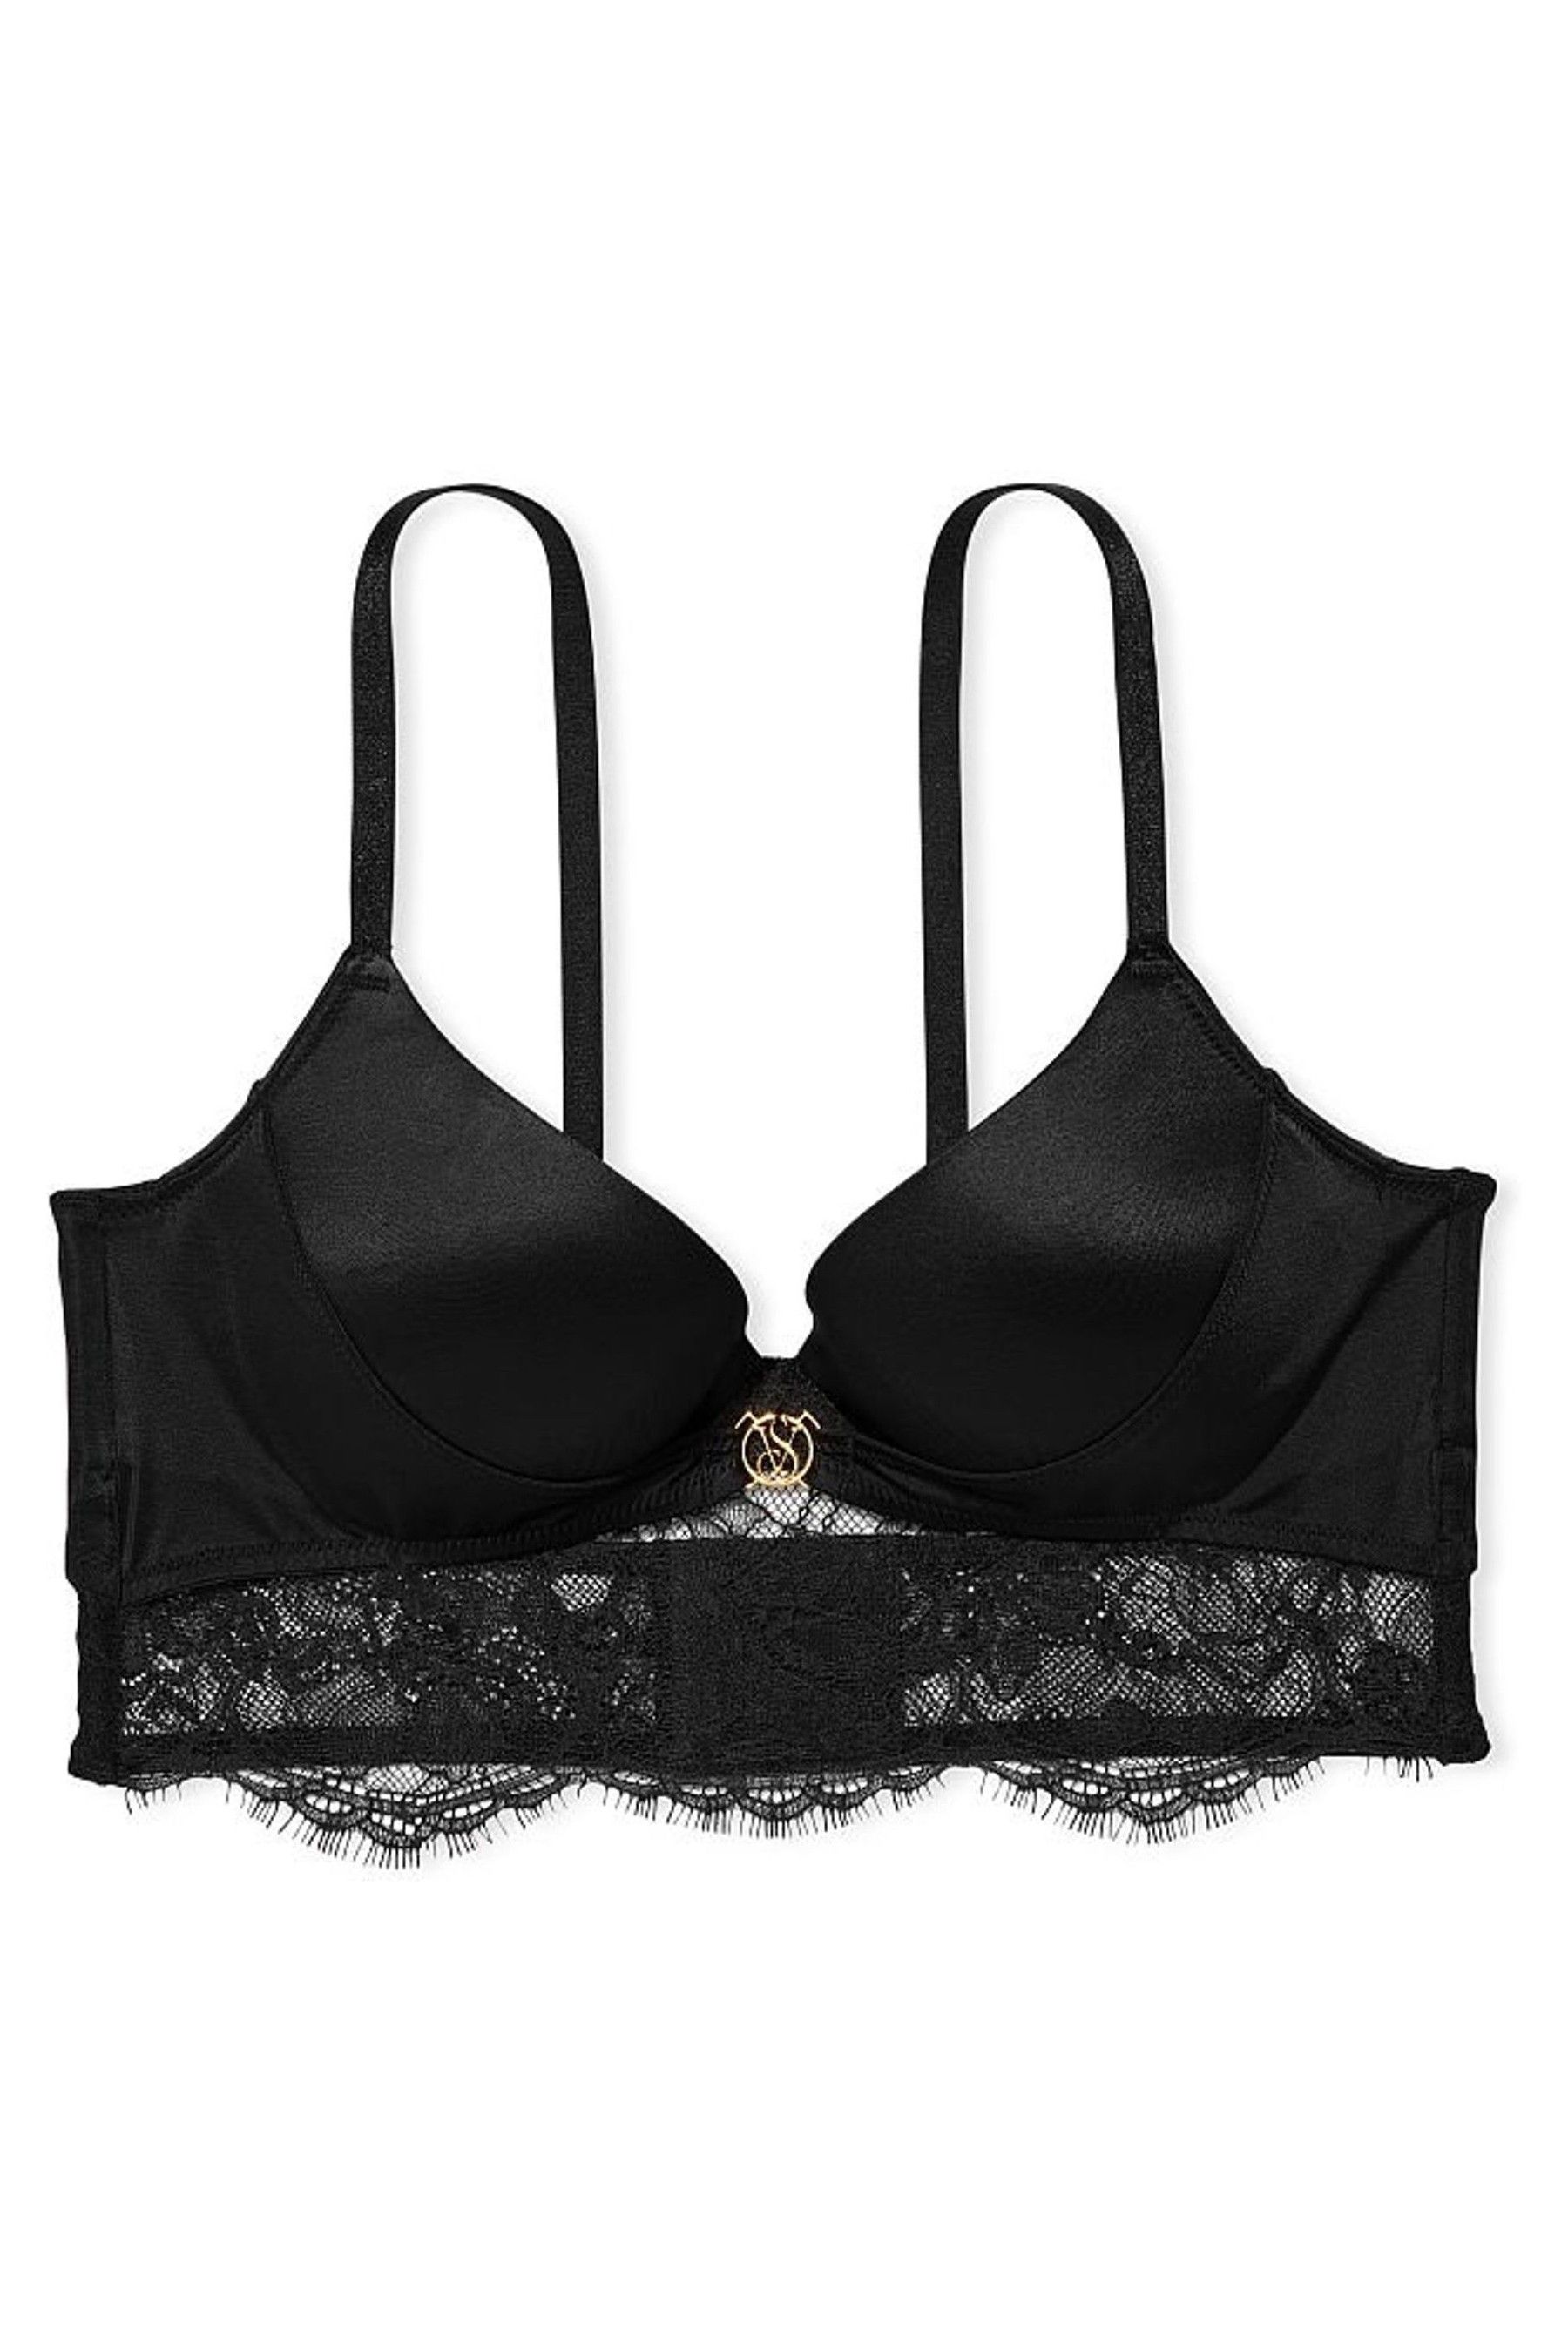 Victoria's Secret Very Sexy So Obsessed Push Up Corset Bra Top ...